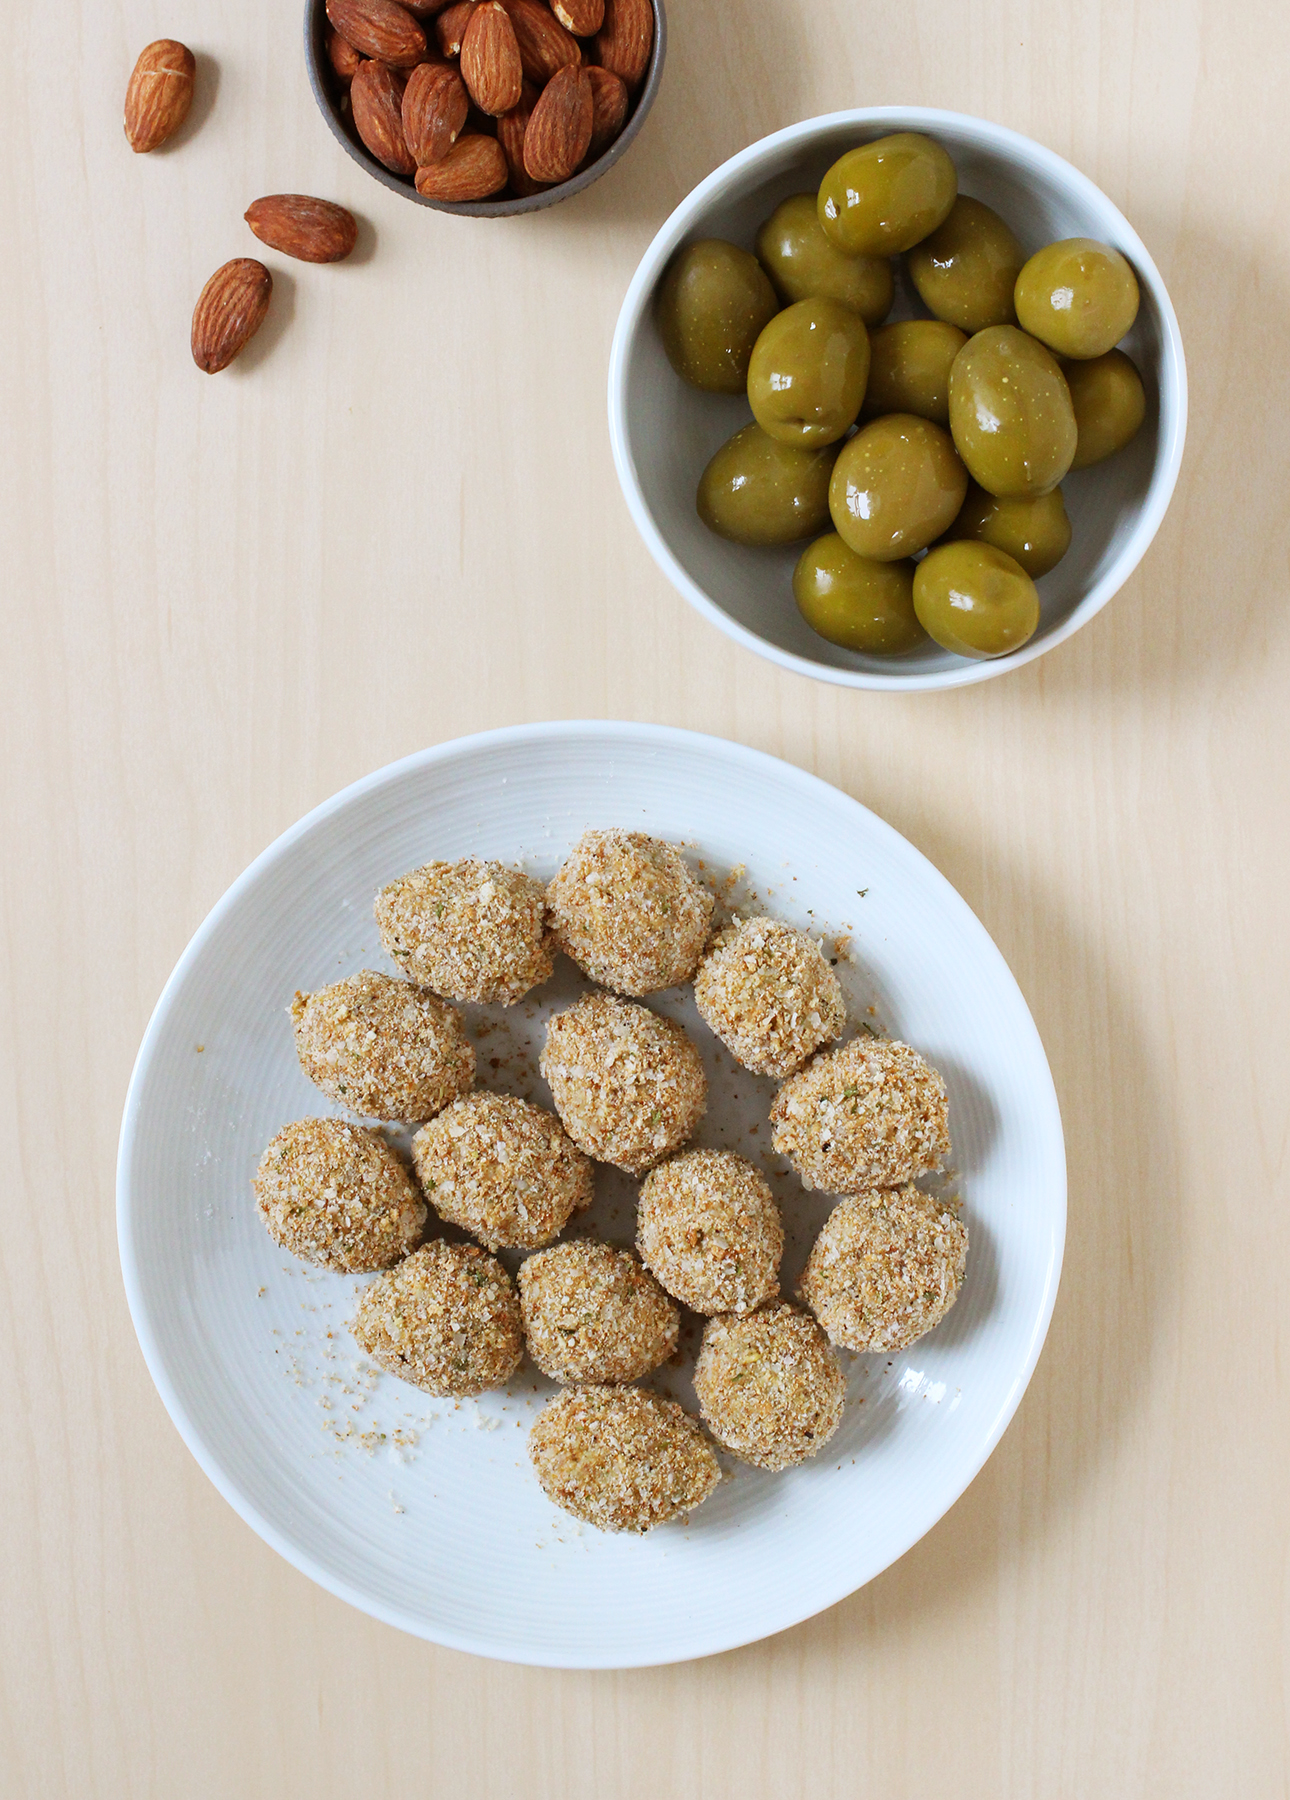 Fried olives made with plump green olives and stuffed with almonds are a tasty snack to enjoy with cocktails // FoodNouveau.com